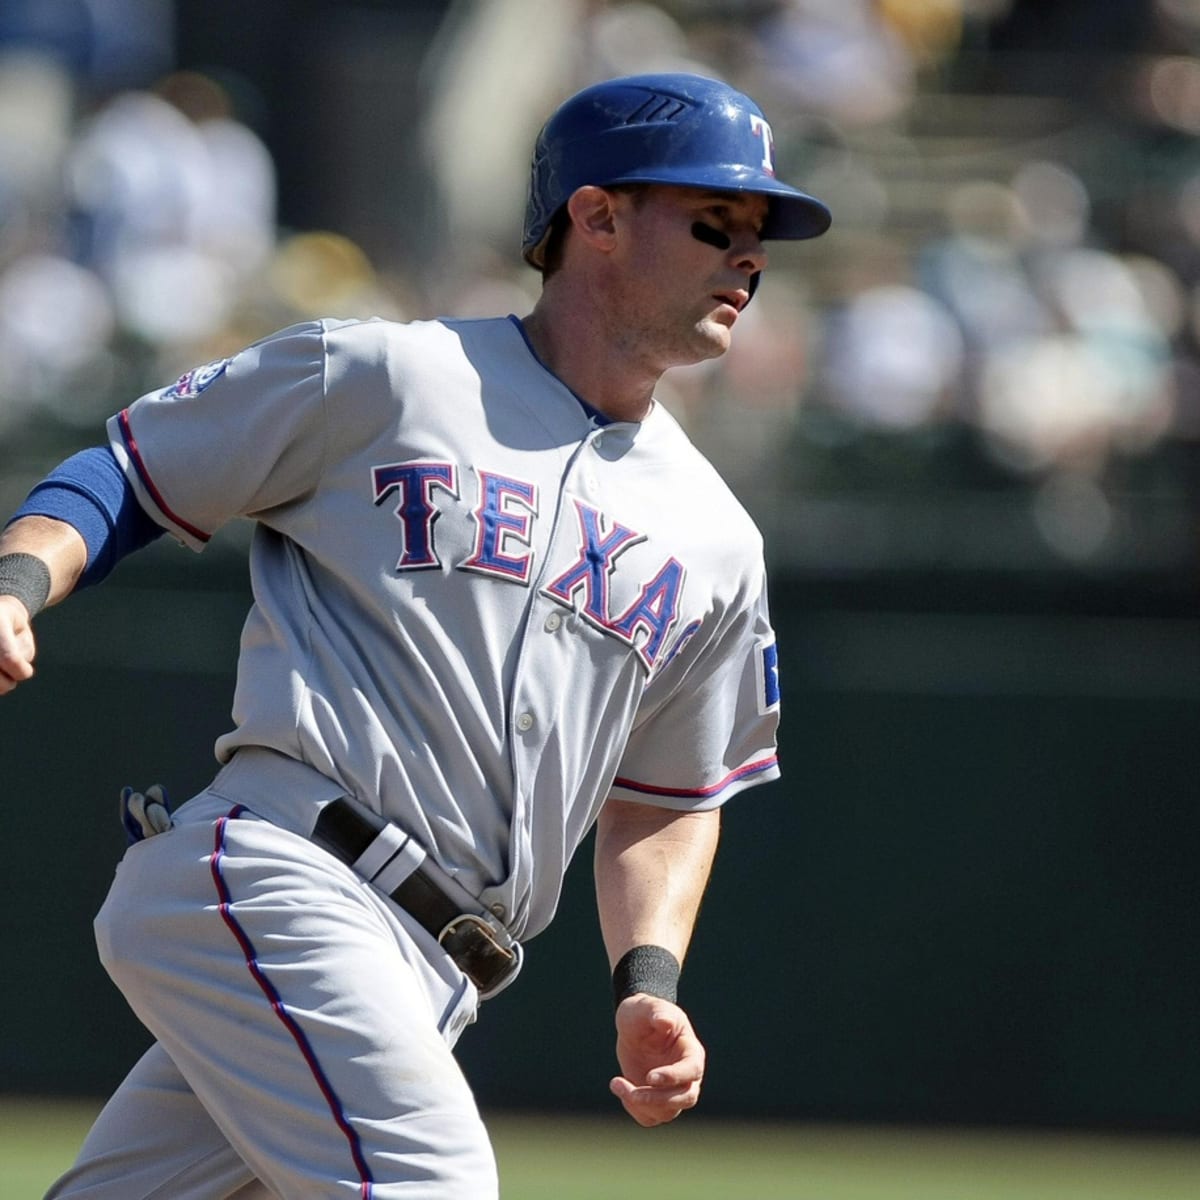 Texas Rangers' Michael Young, right, reaches up to congratulate